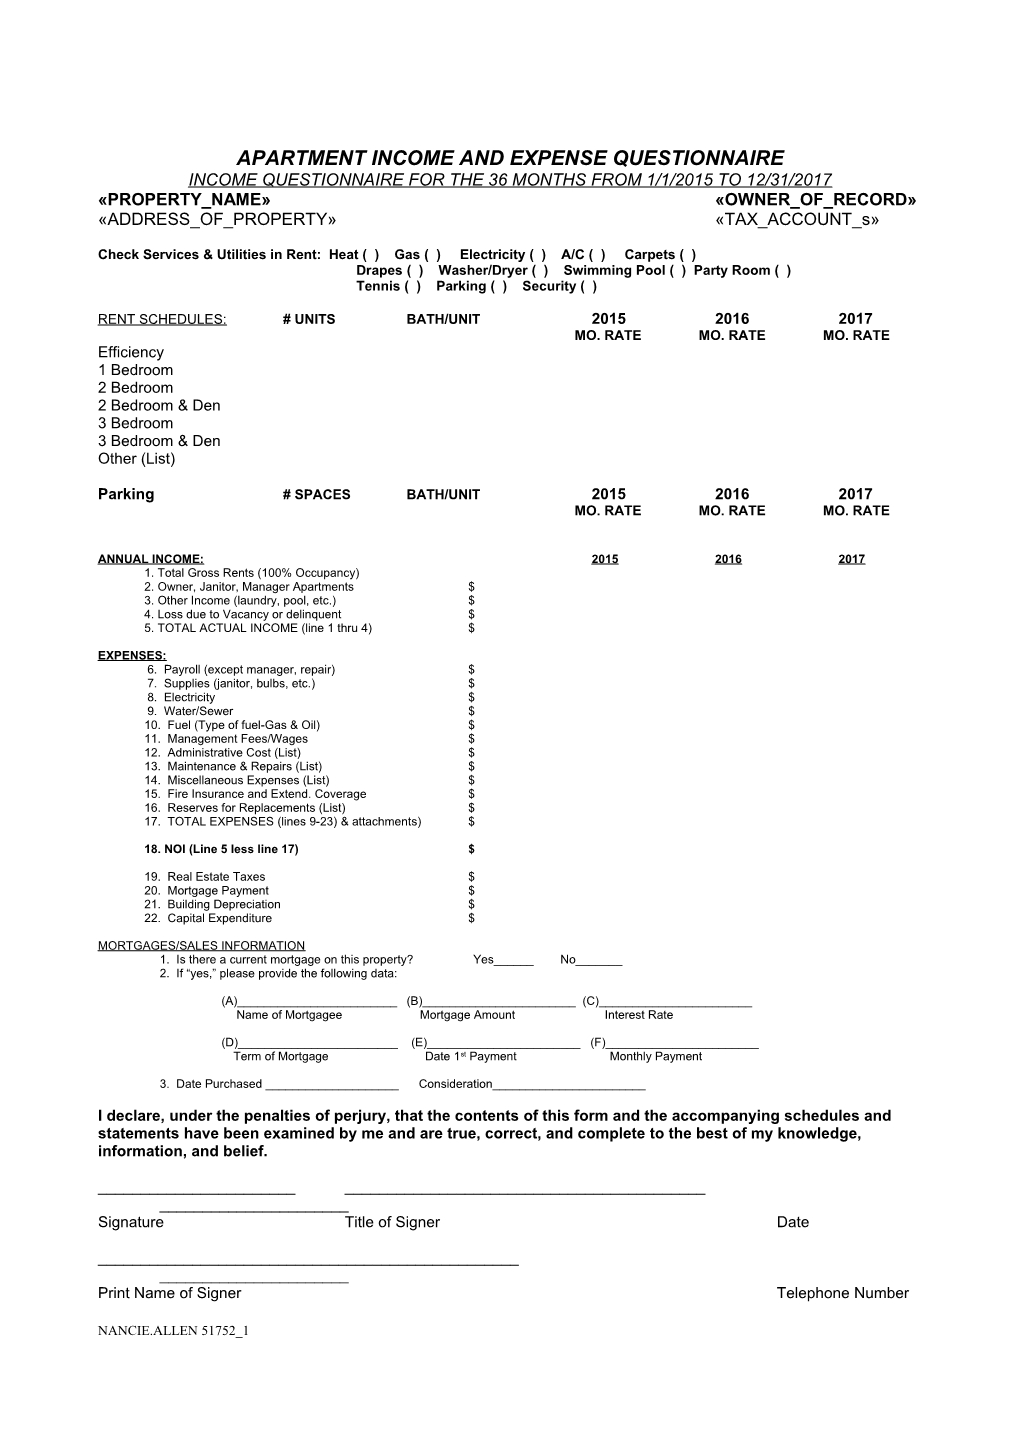 328908-MD Apartment I & E Online Template